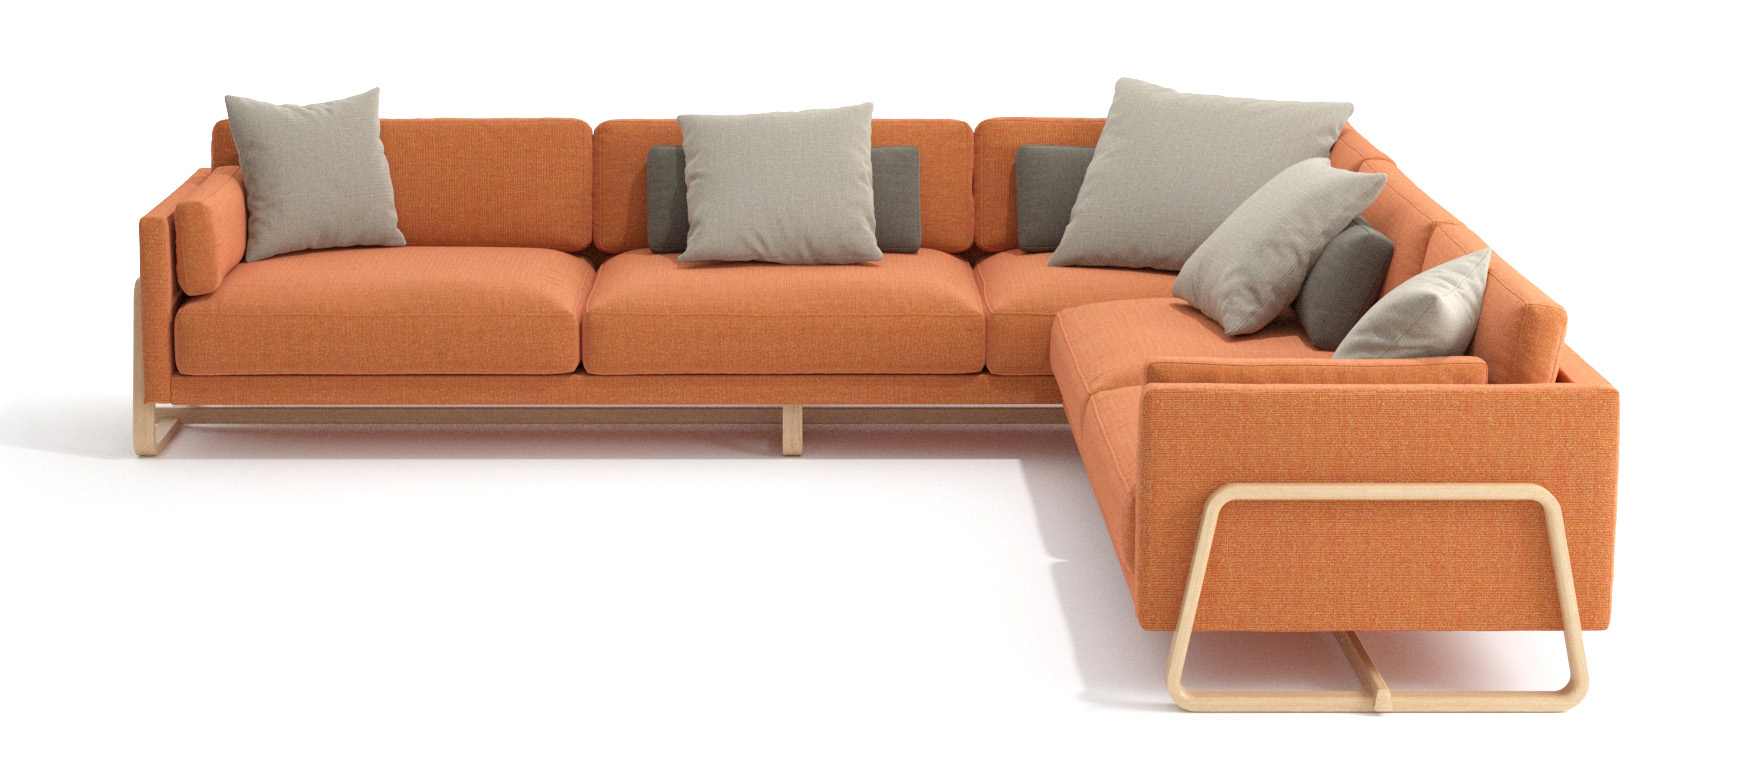 Orange L shaped contract sofa with wooden base